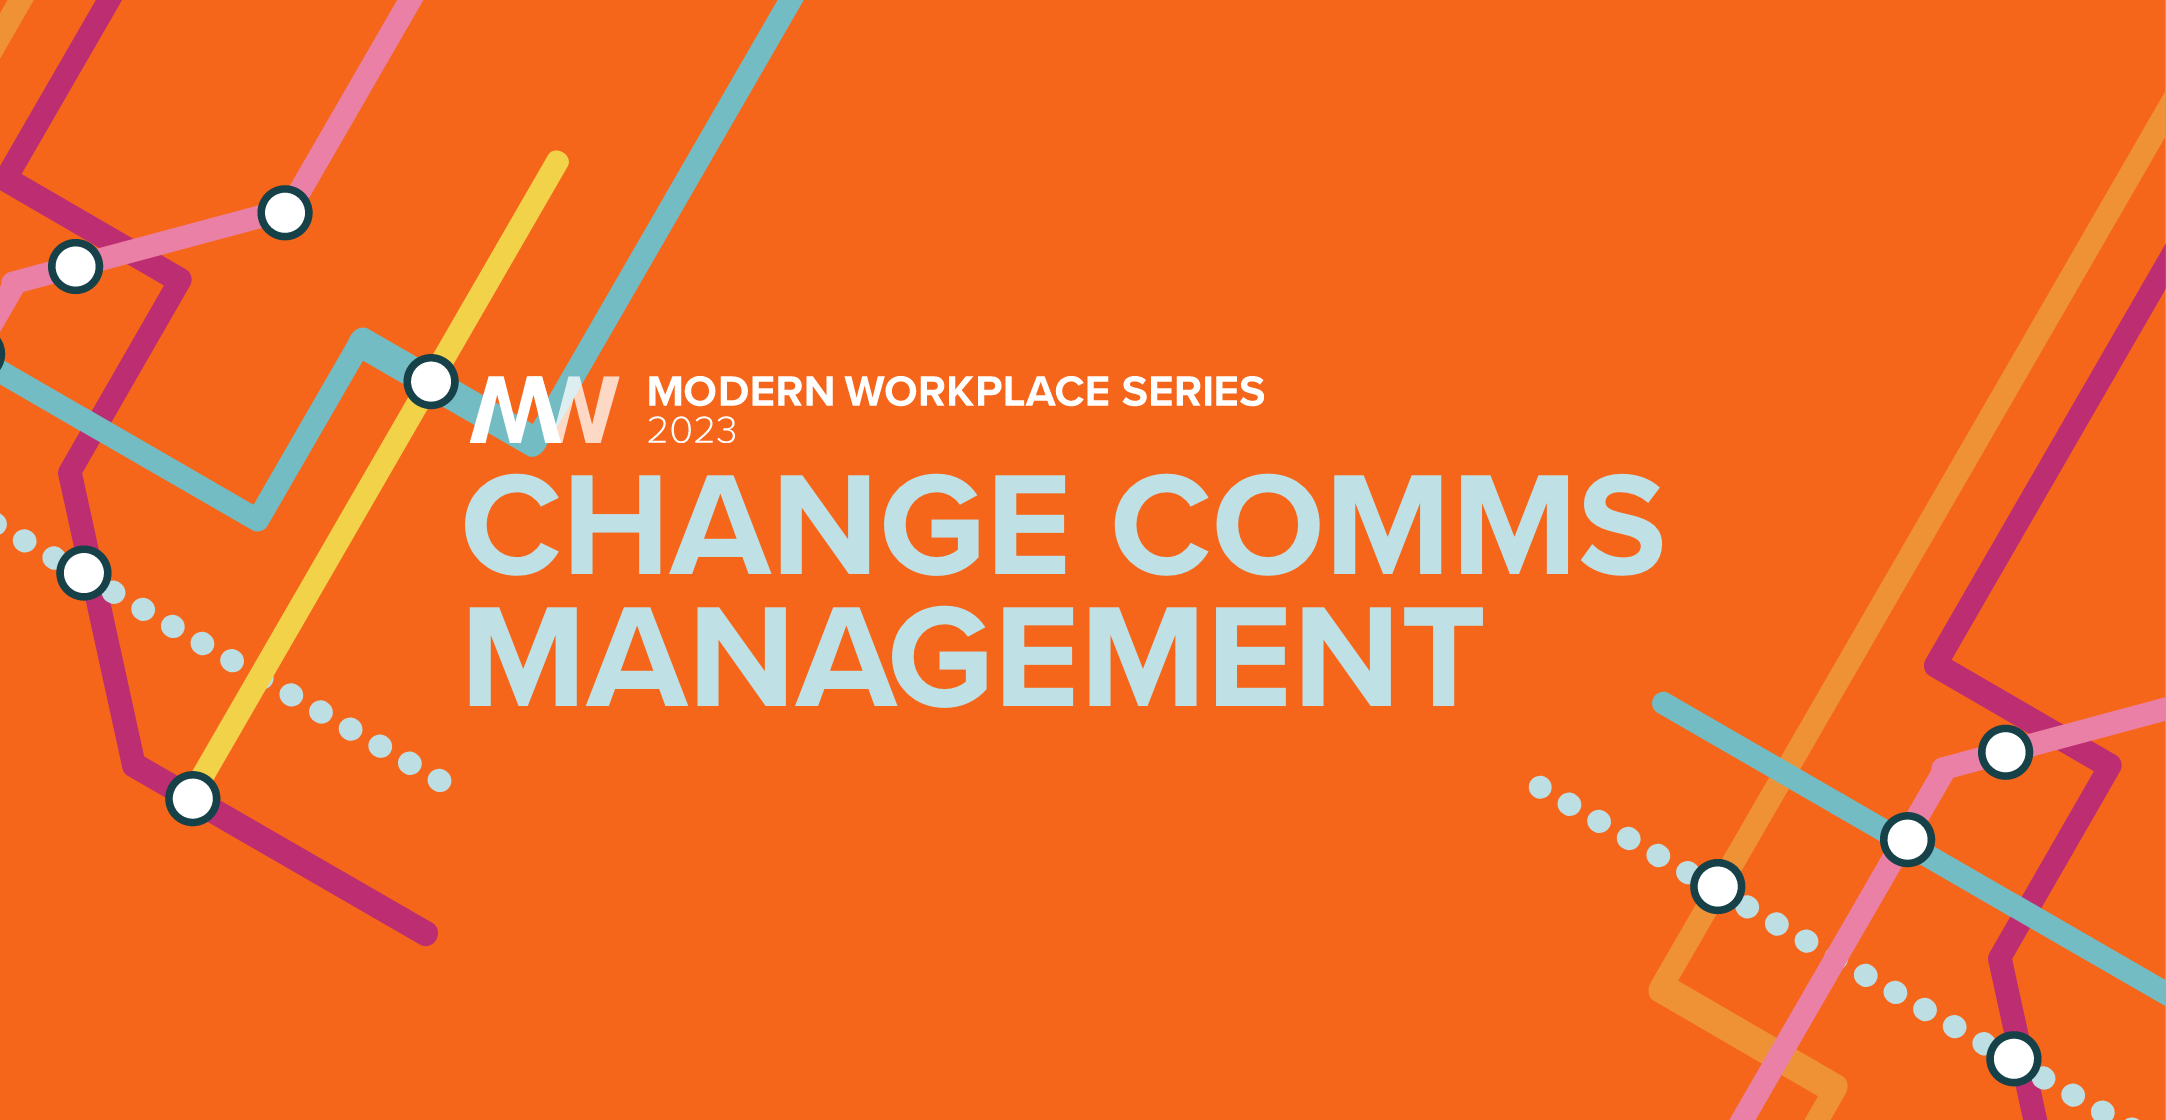 Modern Workplace Series | Change Comms Management